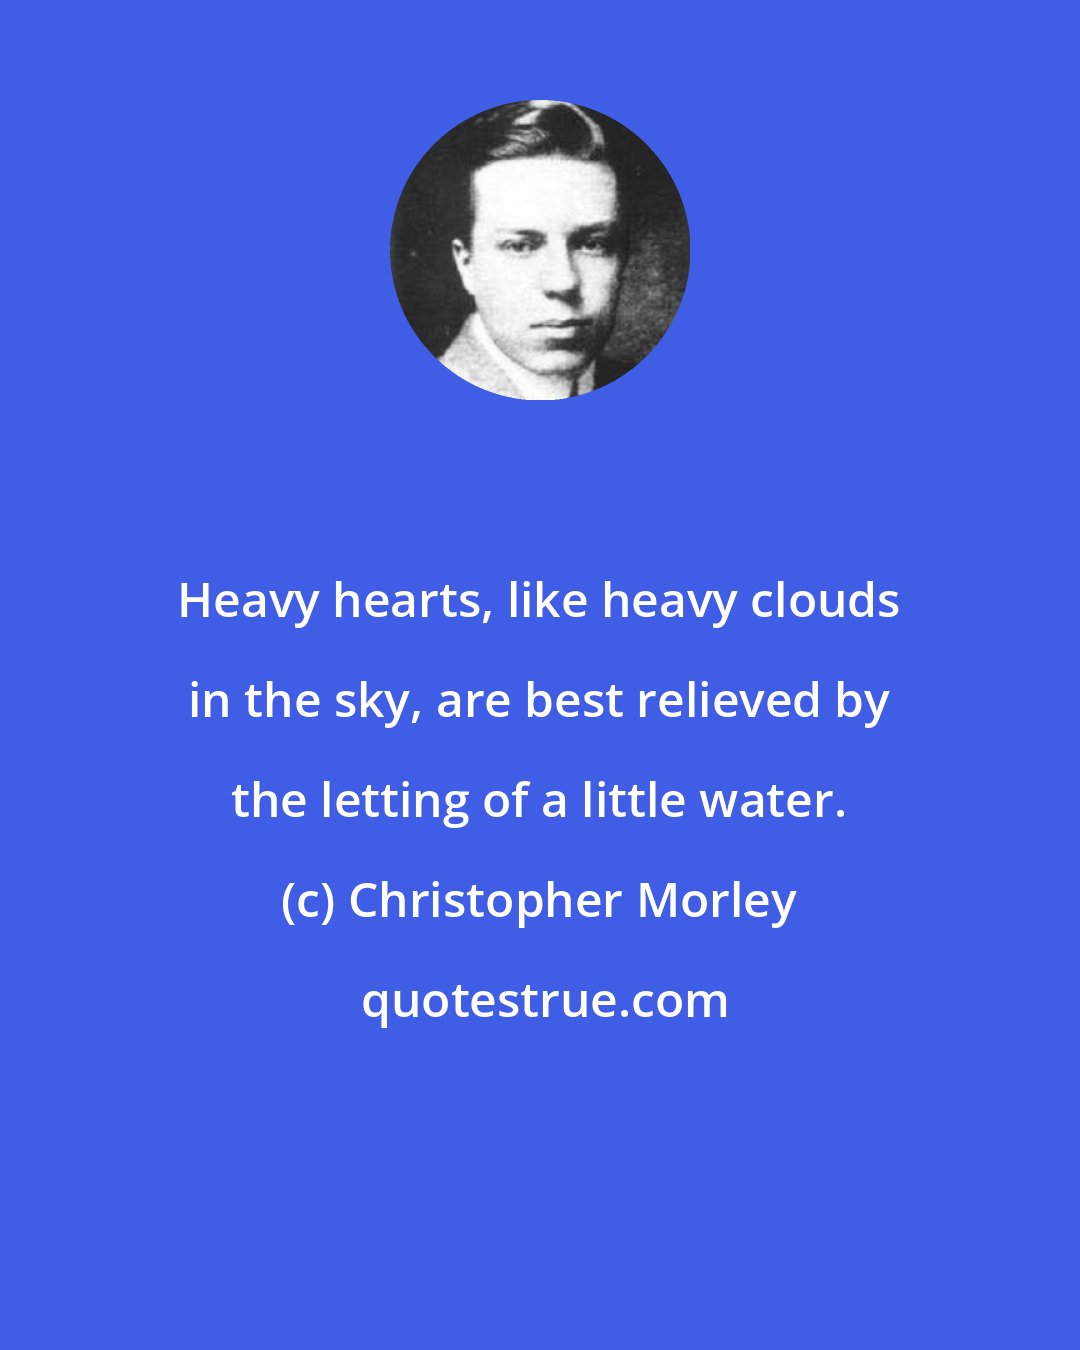 Christopher Morley: Heavy hearts, like heavy clouds in the sky, are best relieved by the letting of a little water.